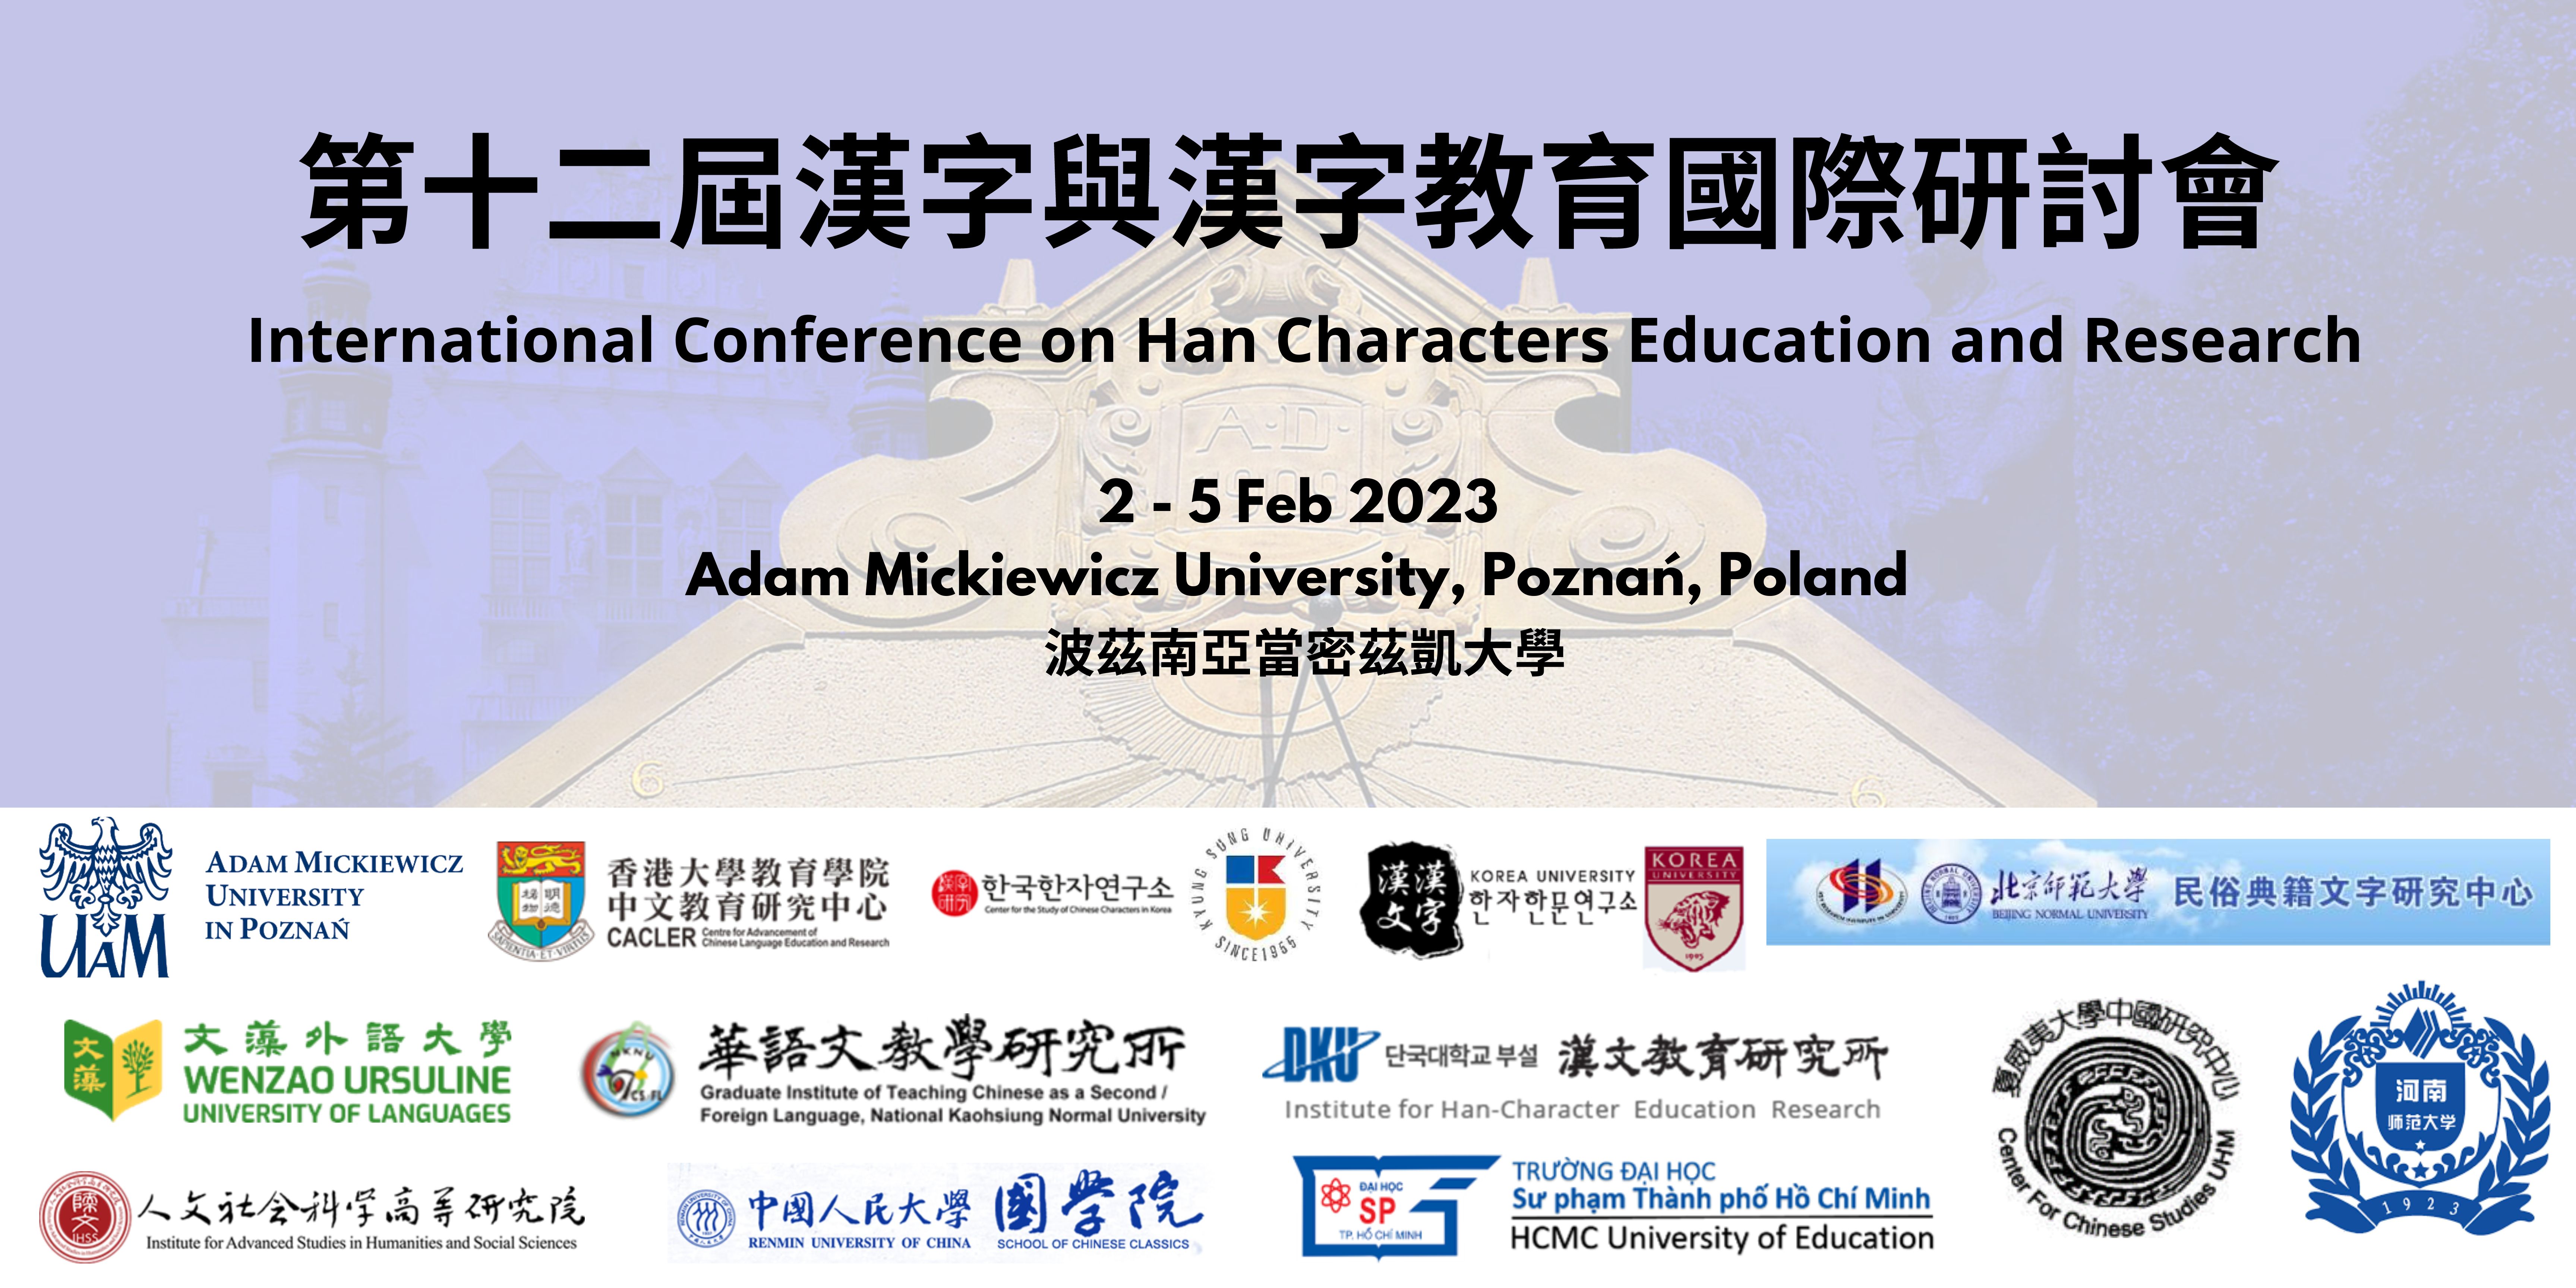 The 12th International Conference on Han Characters Education and Research title